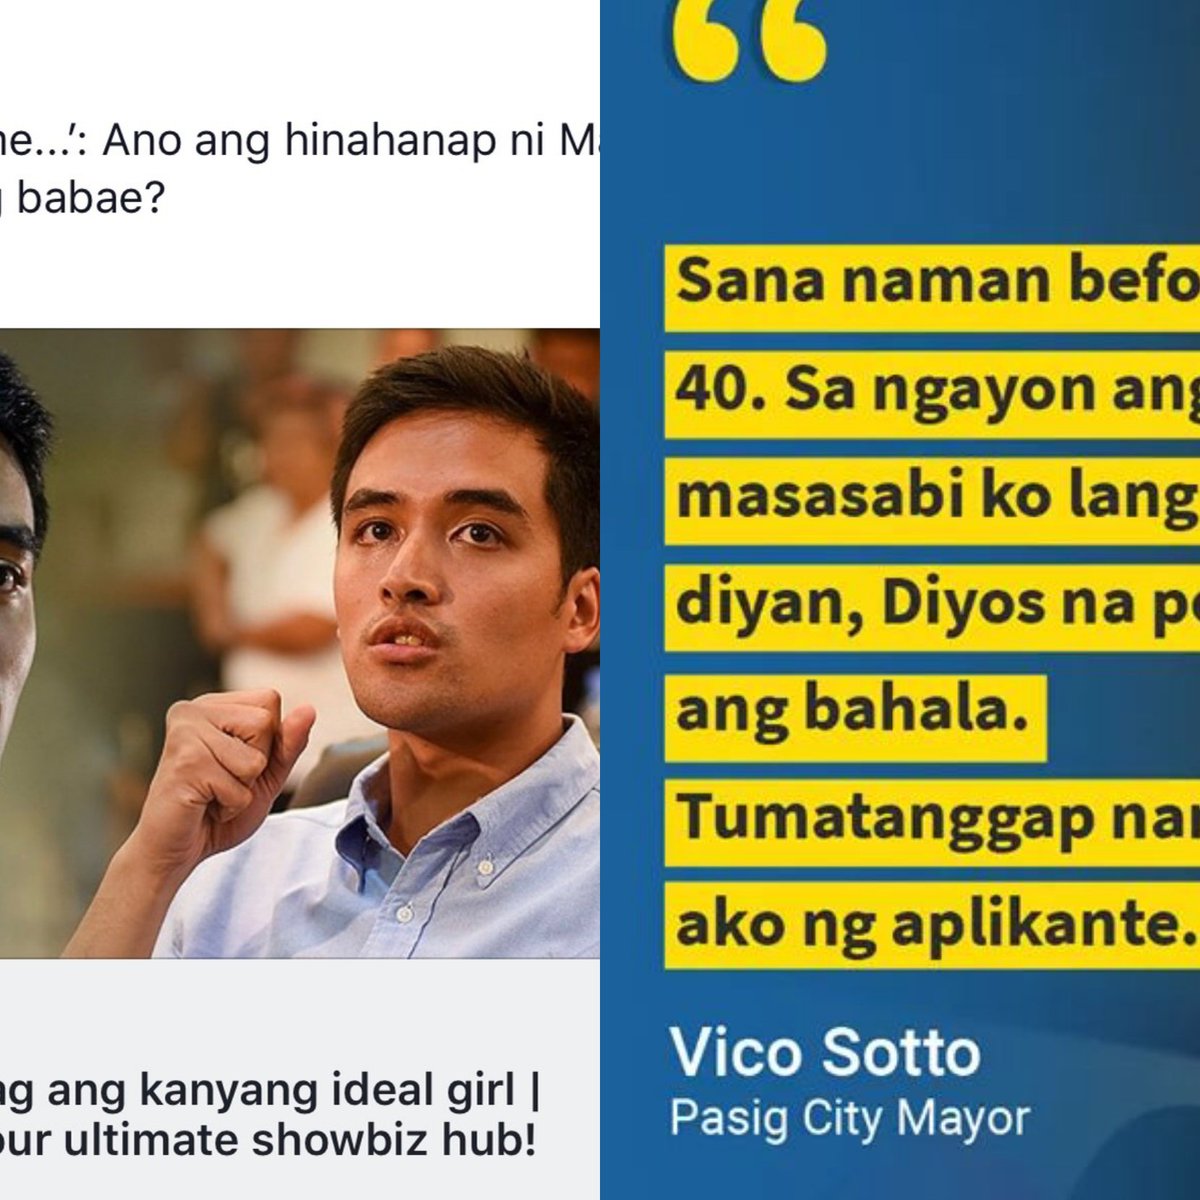 I made this joke during an interview to change the topic.

It is definitely not newsworthy. If i knew it would get this much attention i just wouldnt have answered.

If we want better governance, we should stop treating our government officials like showbiz personalities.